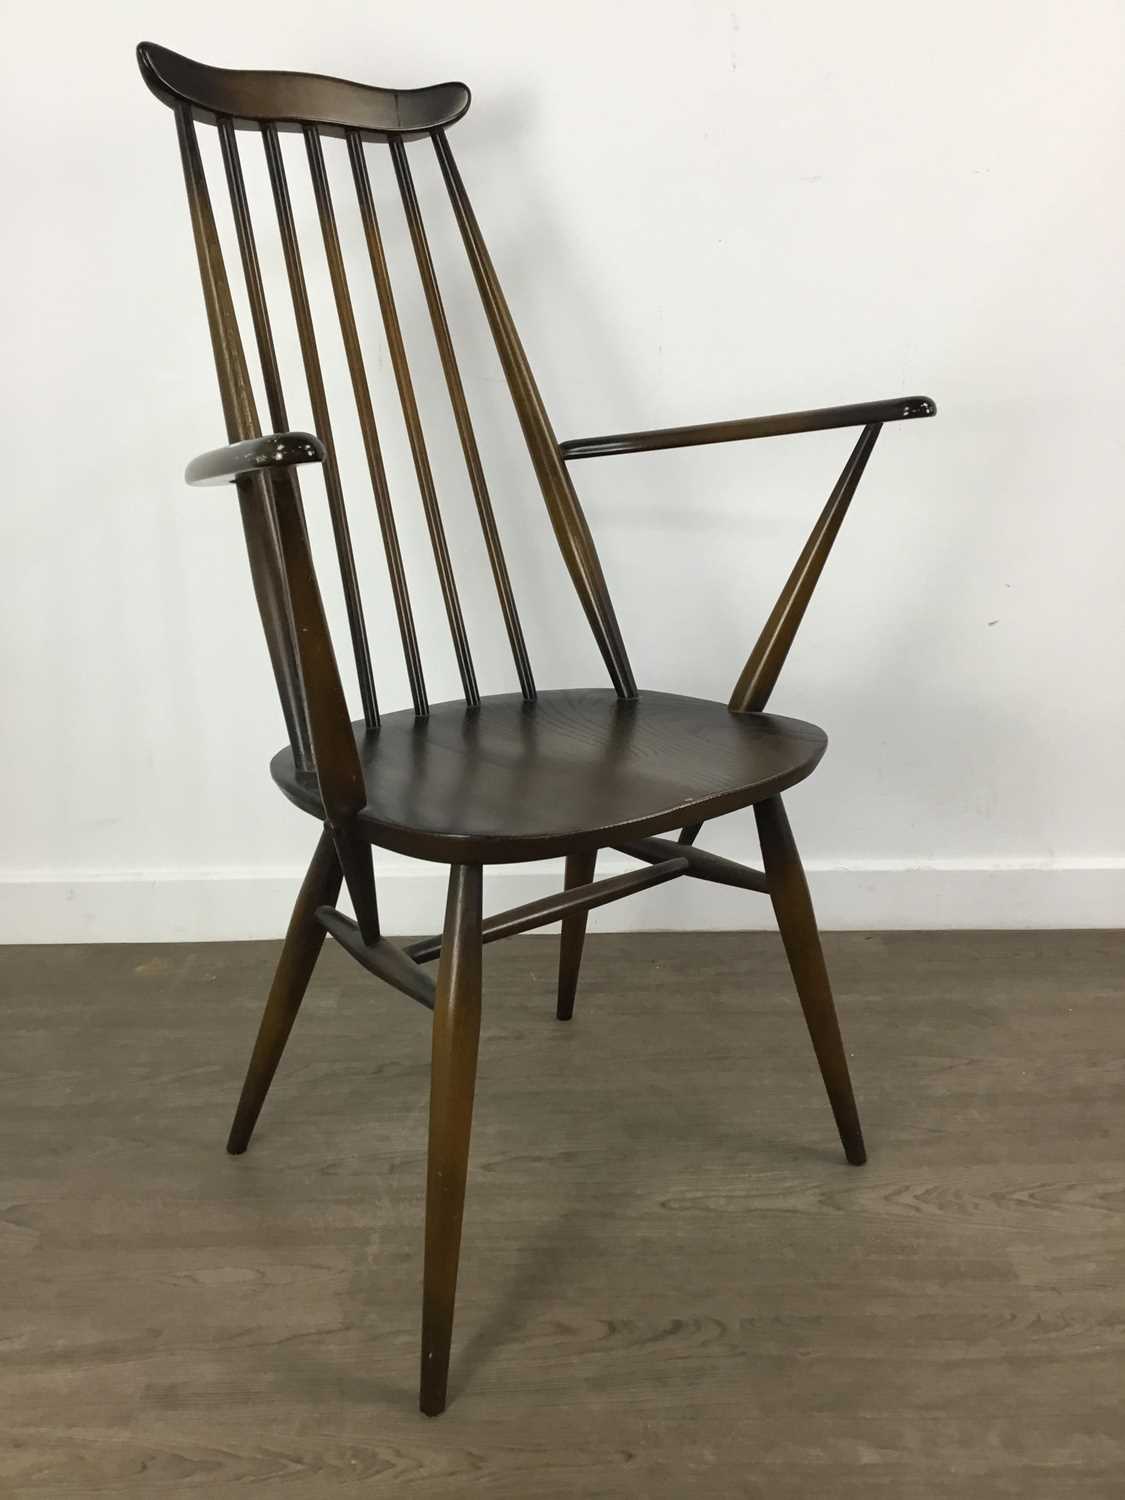 PAIR OF ERCOL GOLDSMITHS ELBOW CHAIRS,